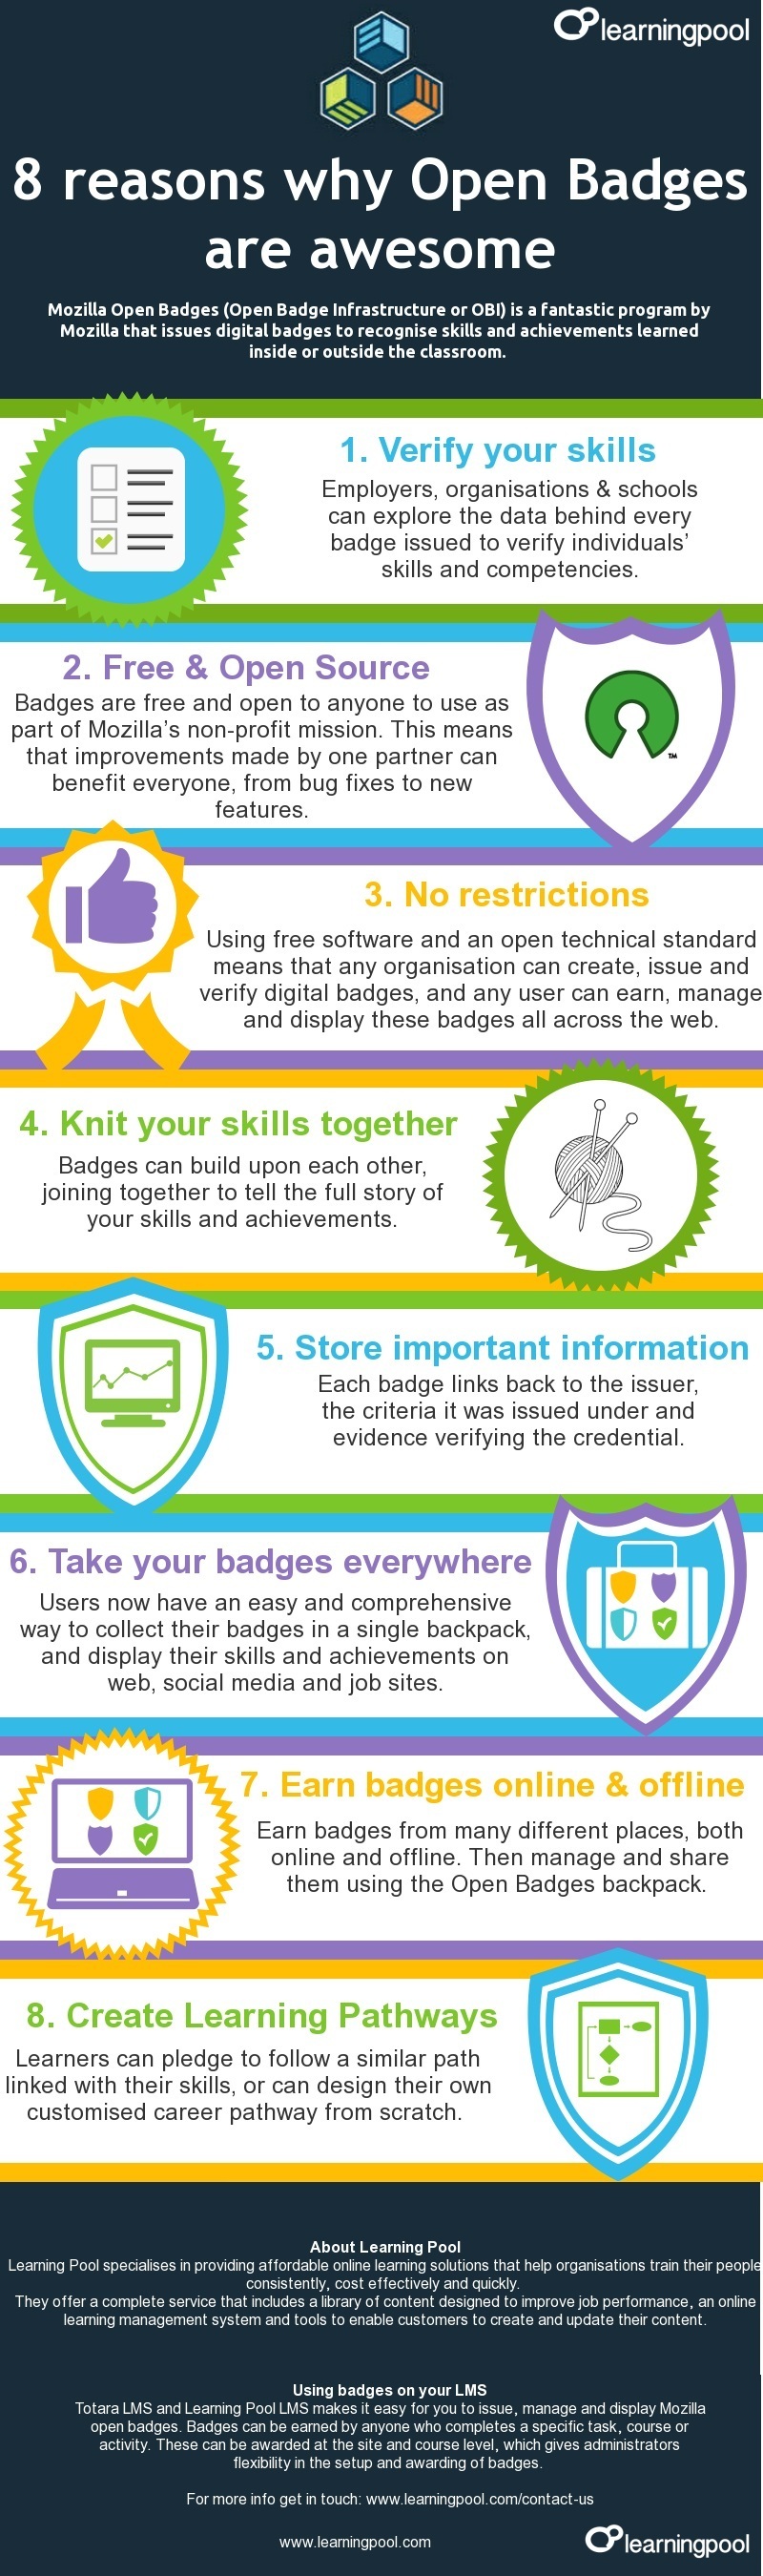 8 Reasons Why Open Badges Are Awesome Infographic